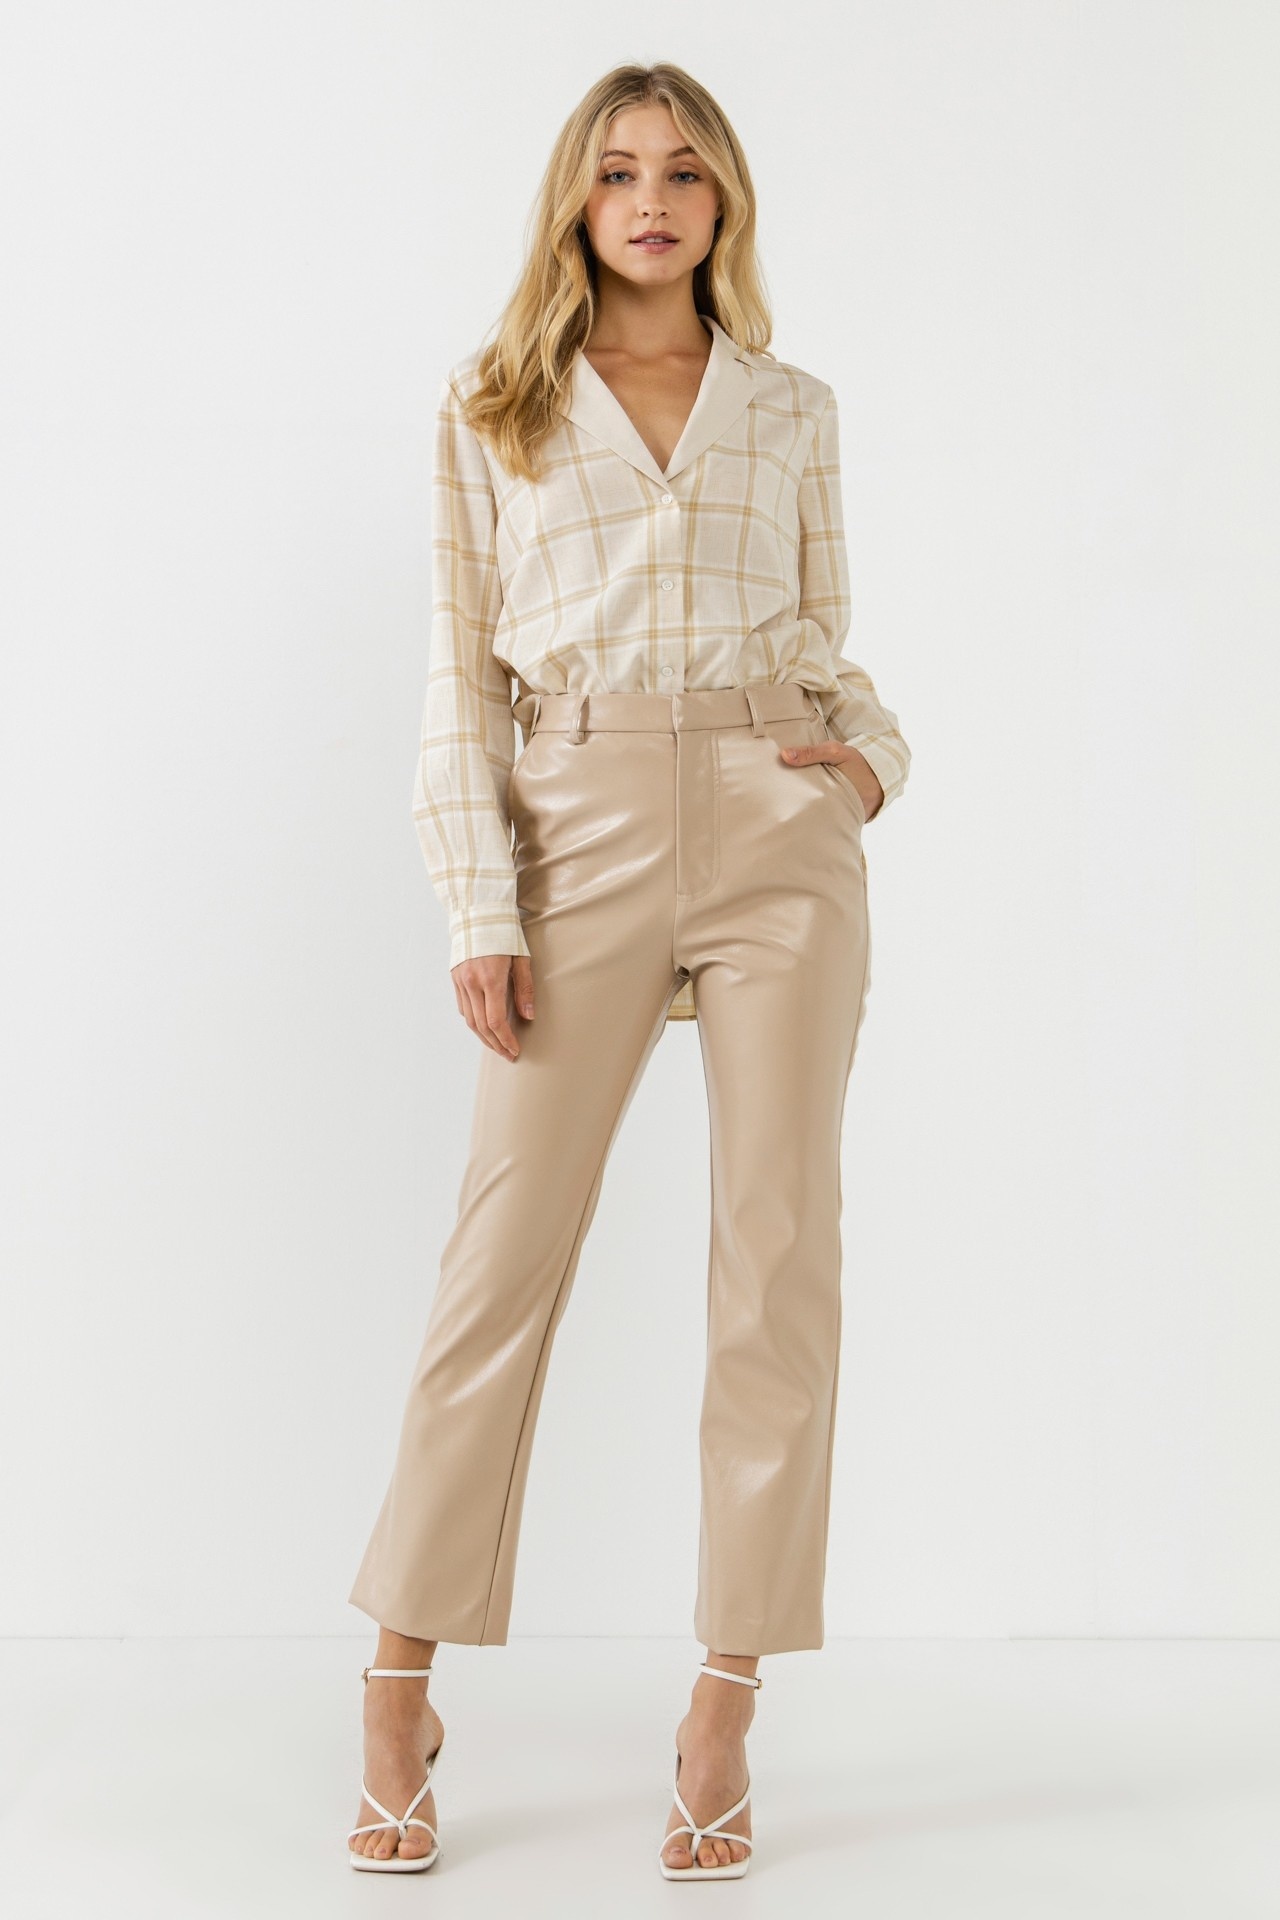 Limitless Faux Leather Trousers